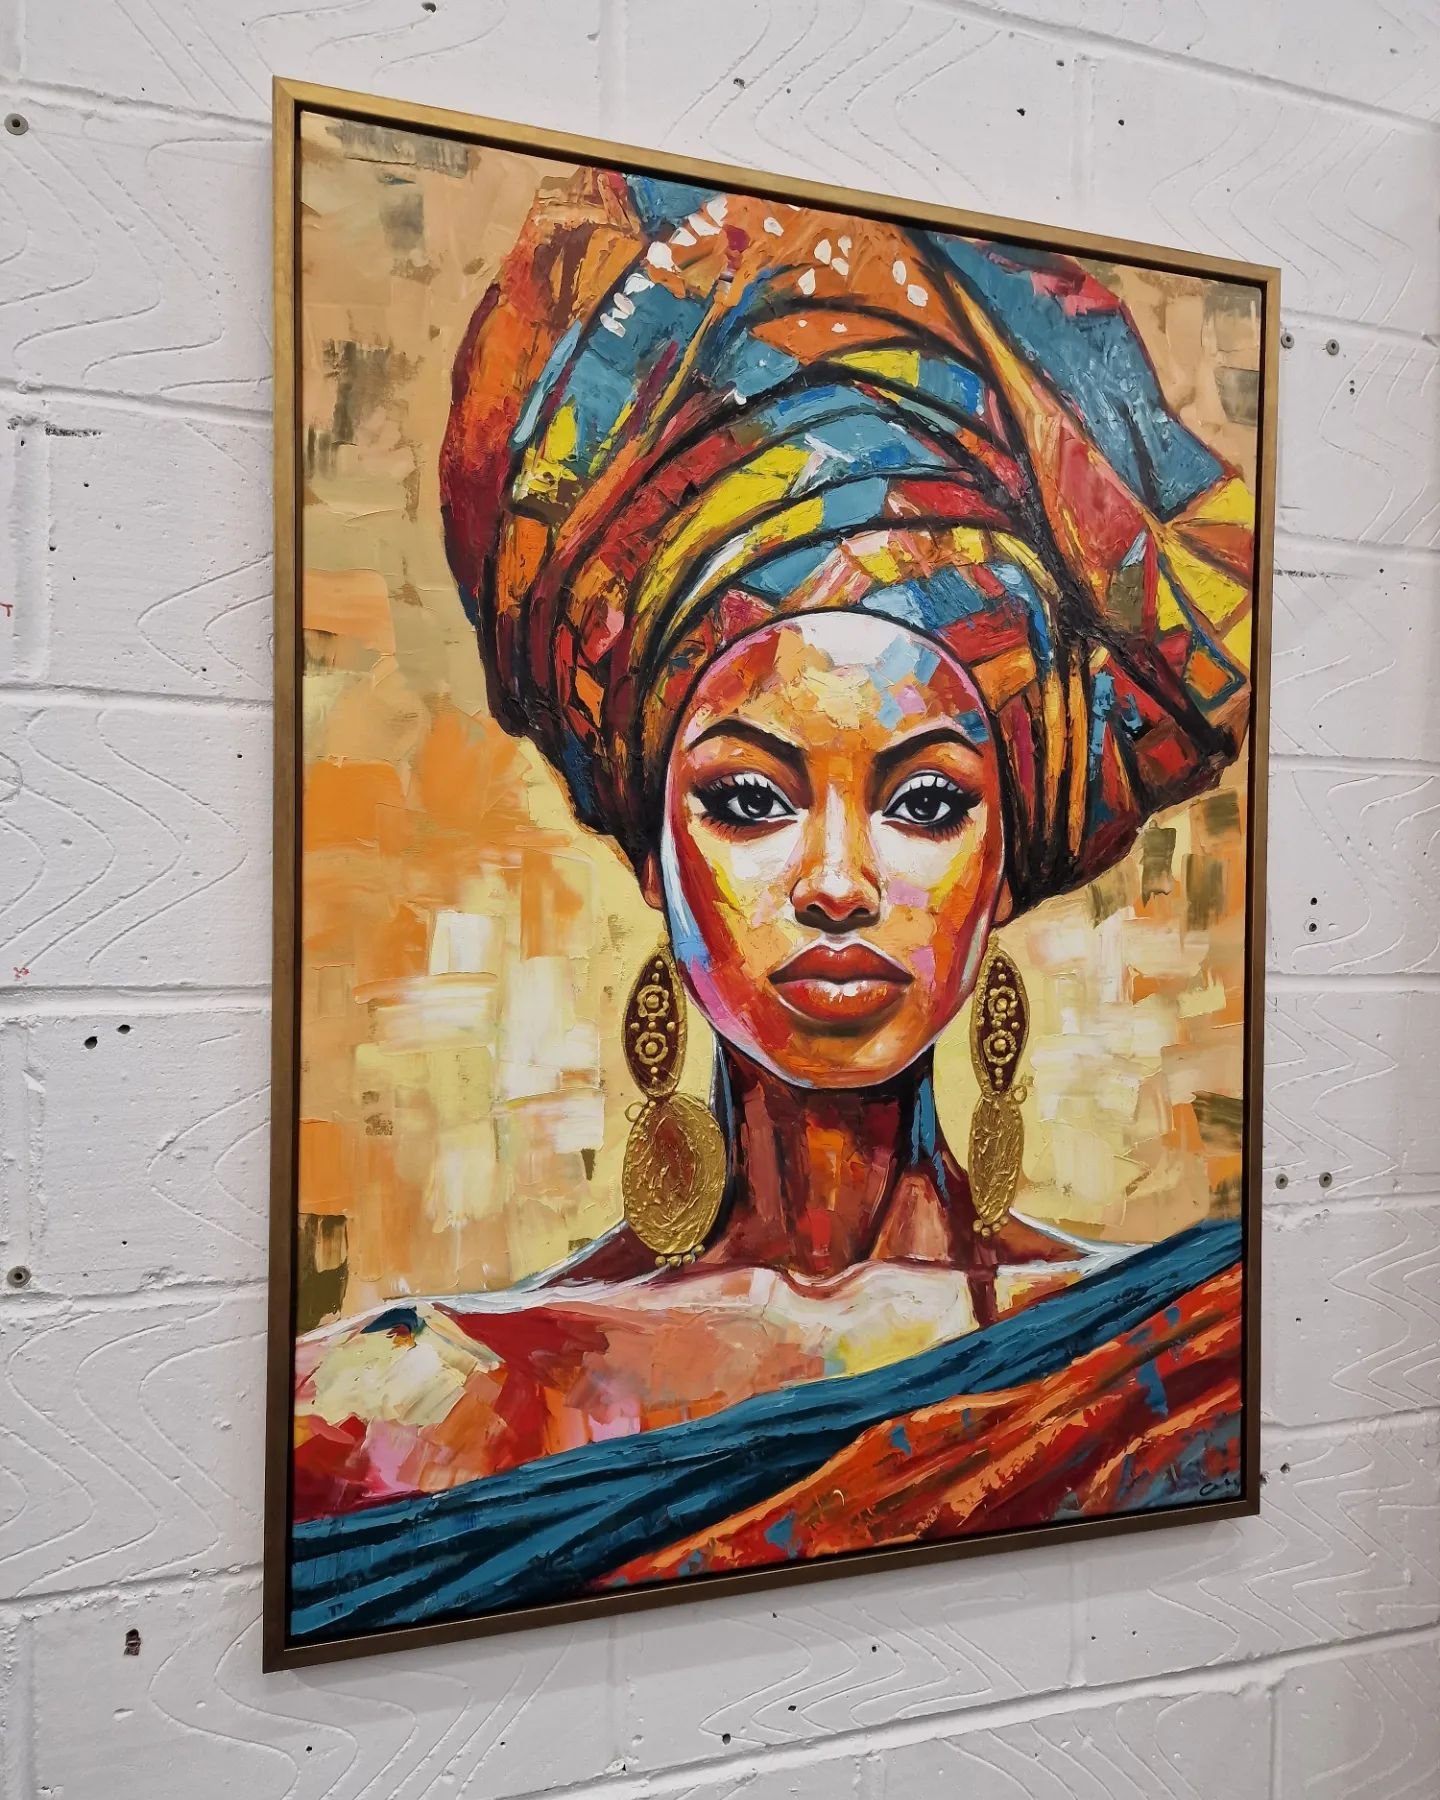 We have had some truly wonderful Thai, street art, come through our doors. And this piece is up there with the best so far.

Brought to us rolled up, this large canvas has been stretched and fixed to a gold tray frame.

#canvasart #trayframe #wallart